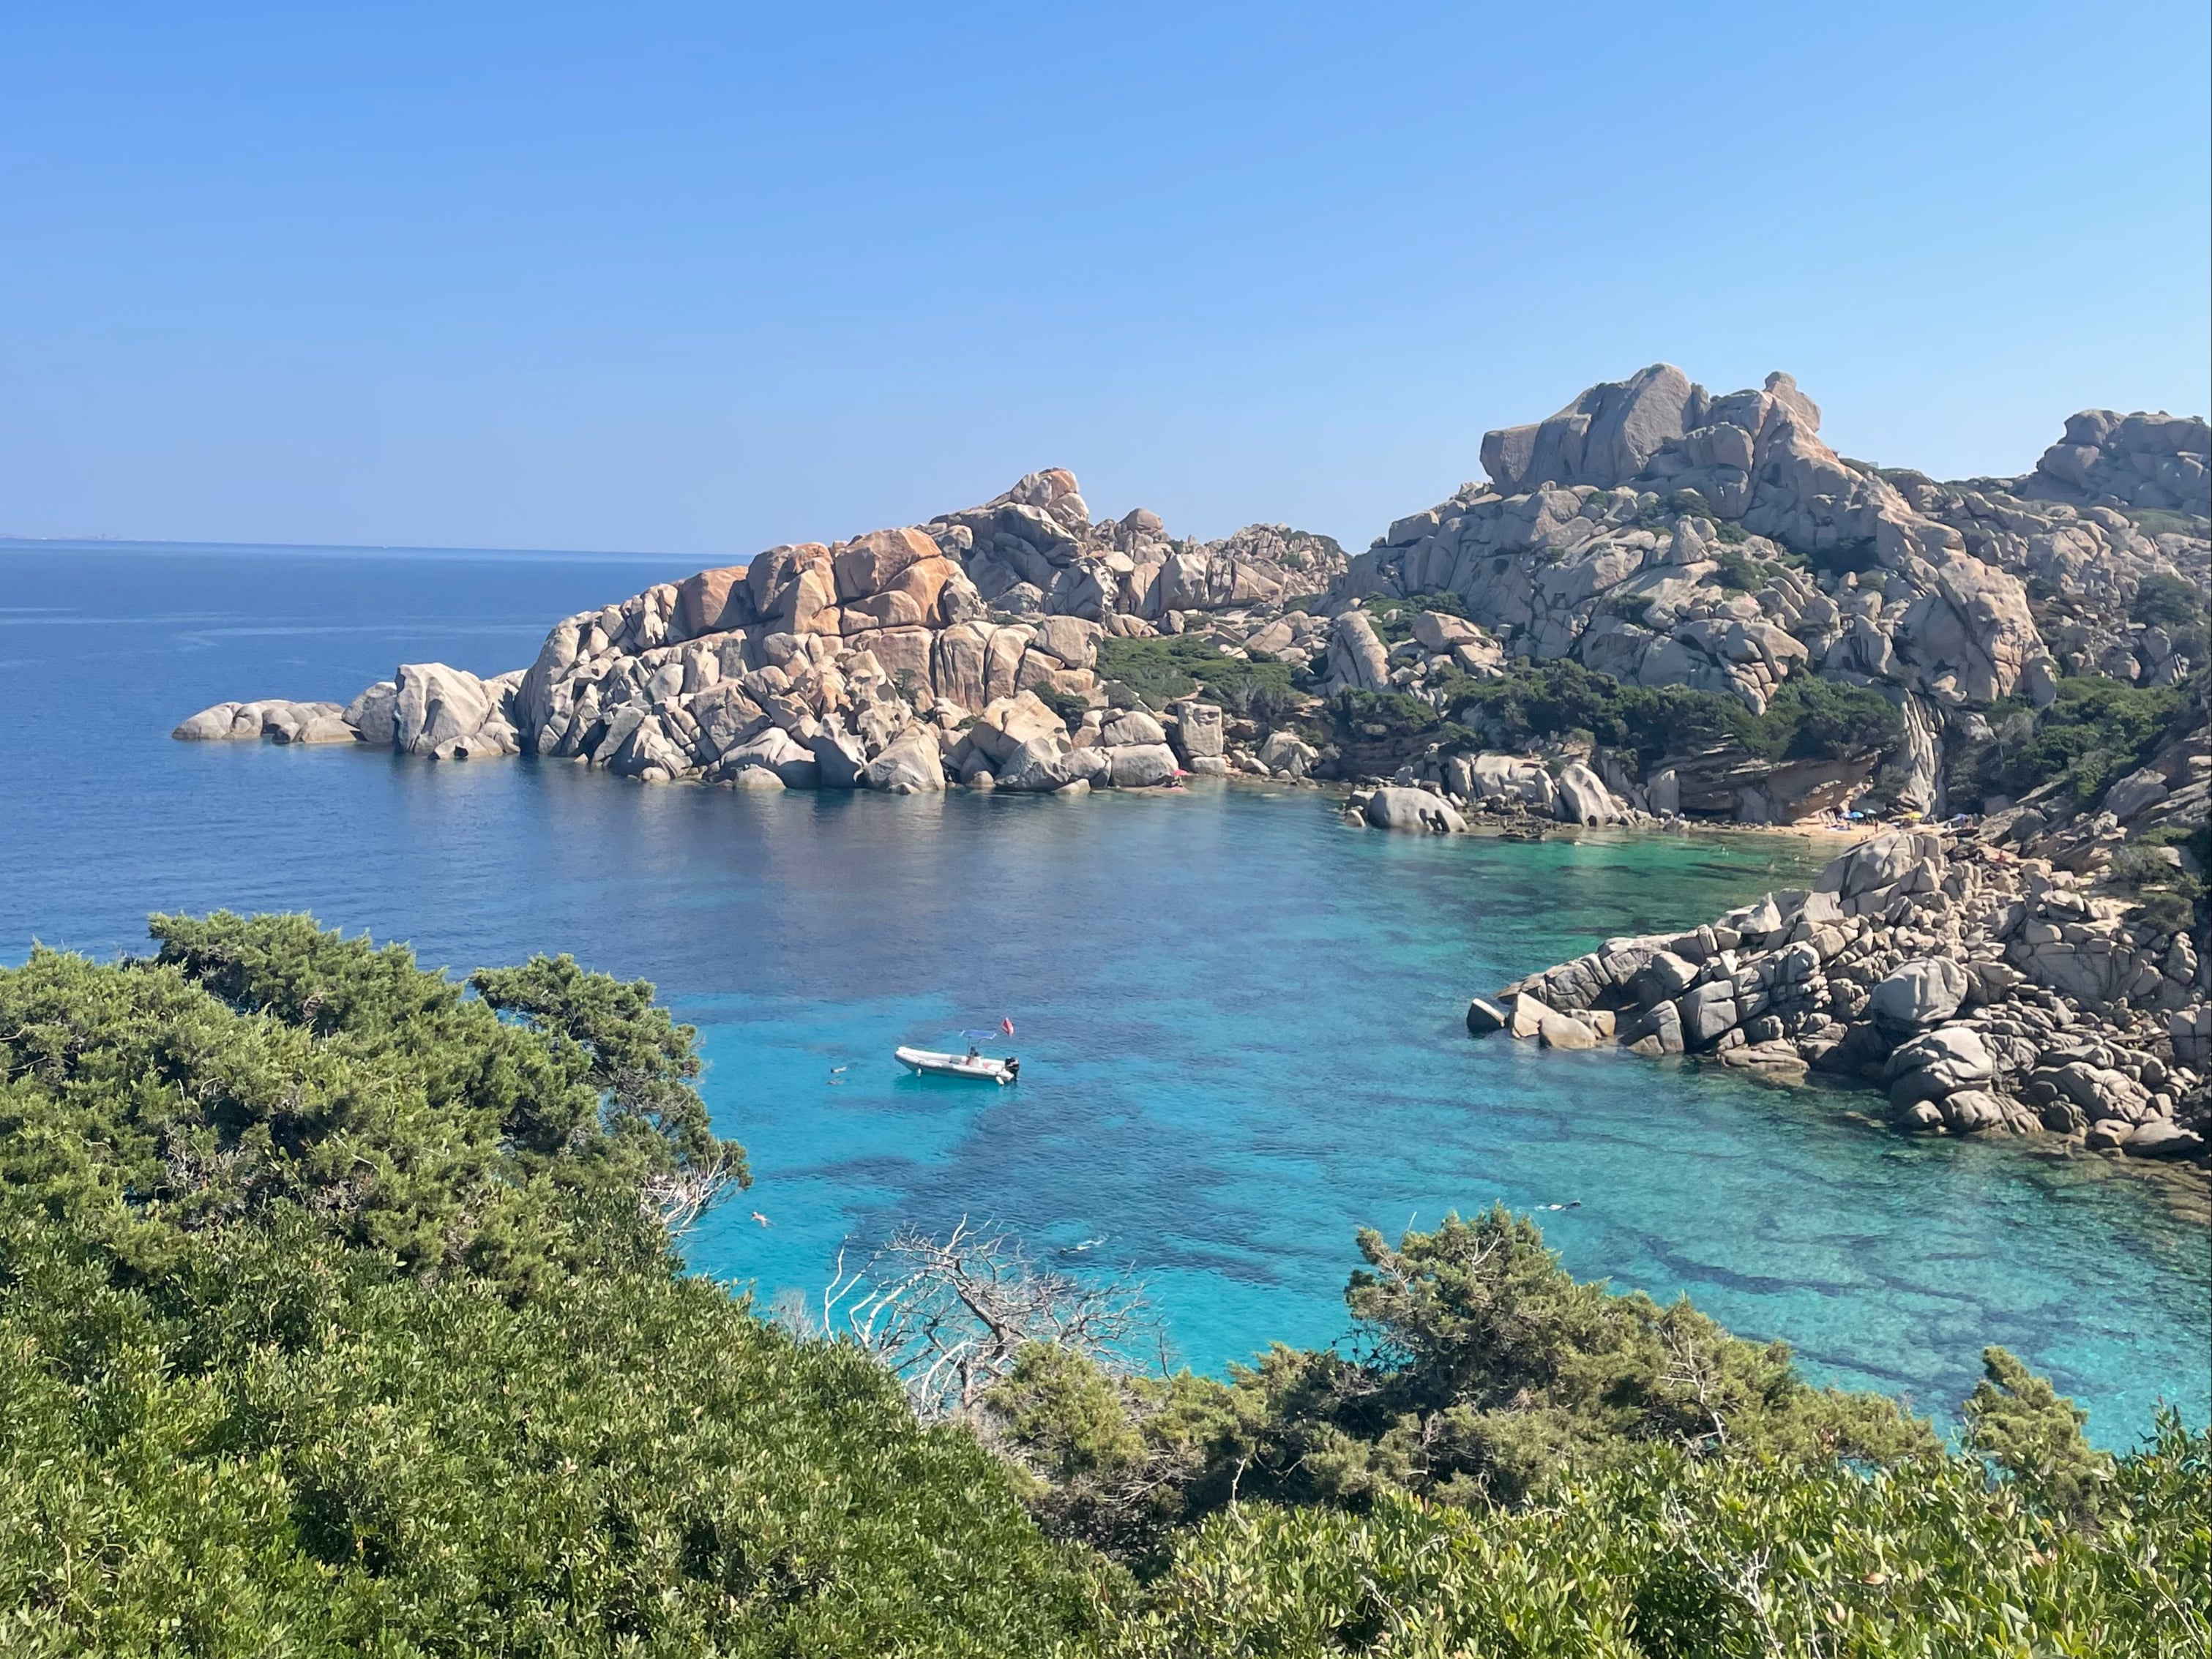 Sardinia’s bright turquoise waters earn it the nickname the ‘Caribbean of Europe'